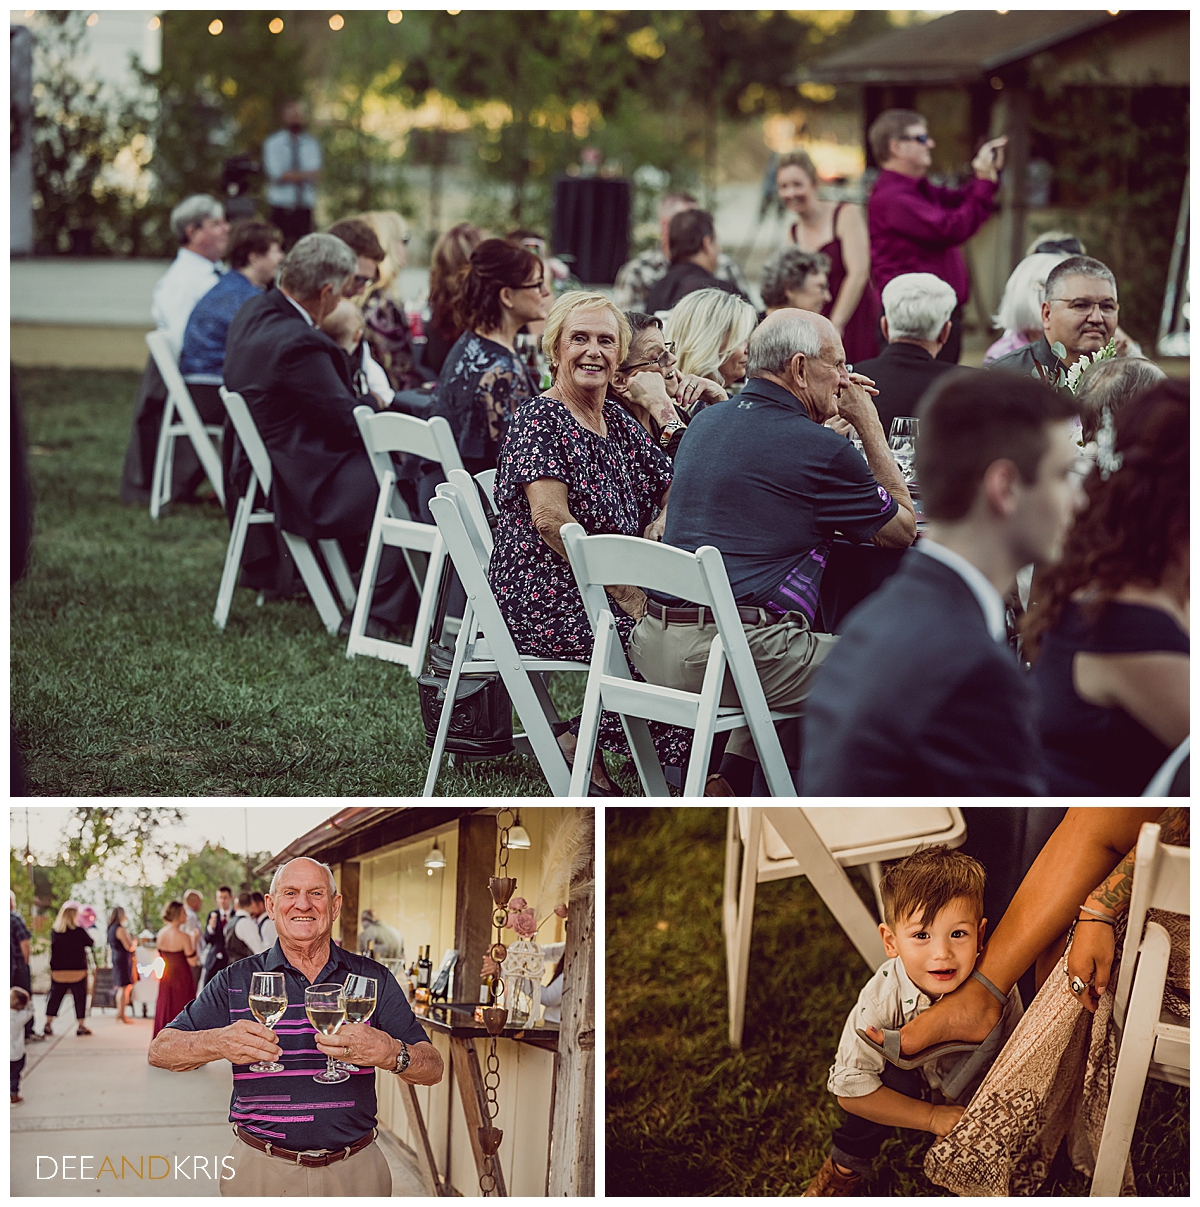 Three images of wedding guests